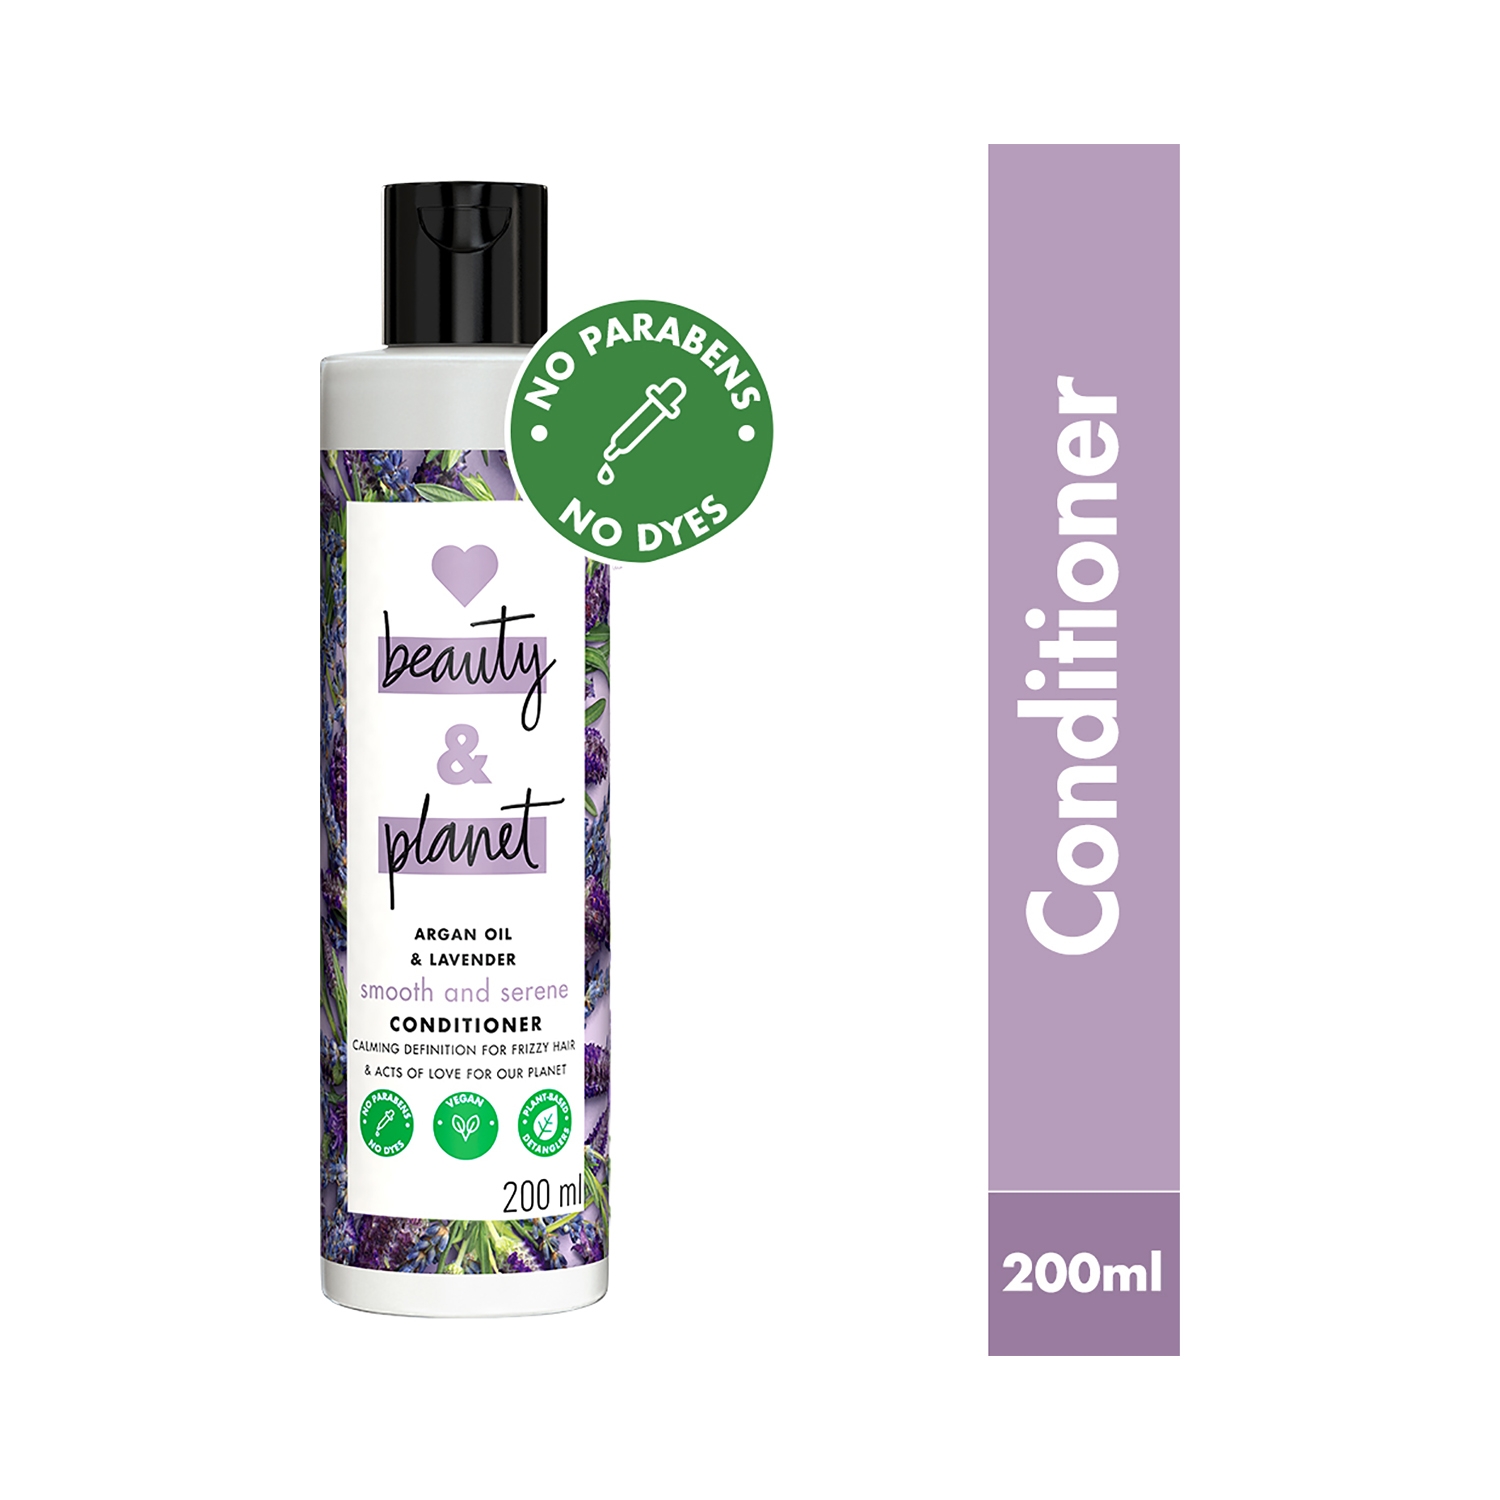 Love Beauty & Planet | Love Beauty & Planet Argan Oil and Lavender Smooth and Serene Conditioner (200ml)